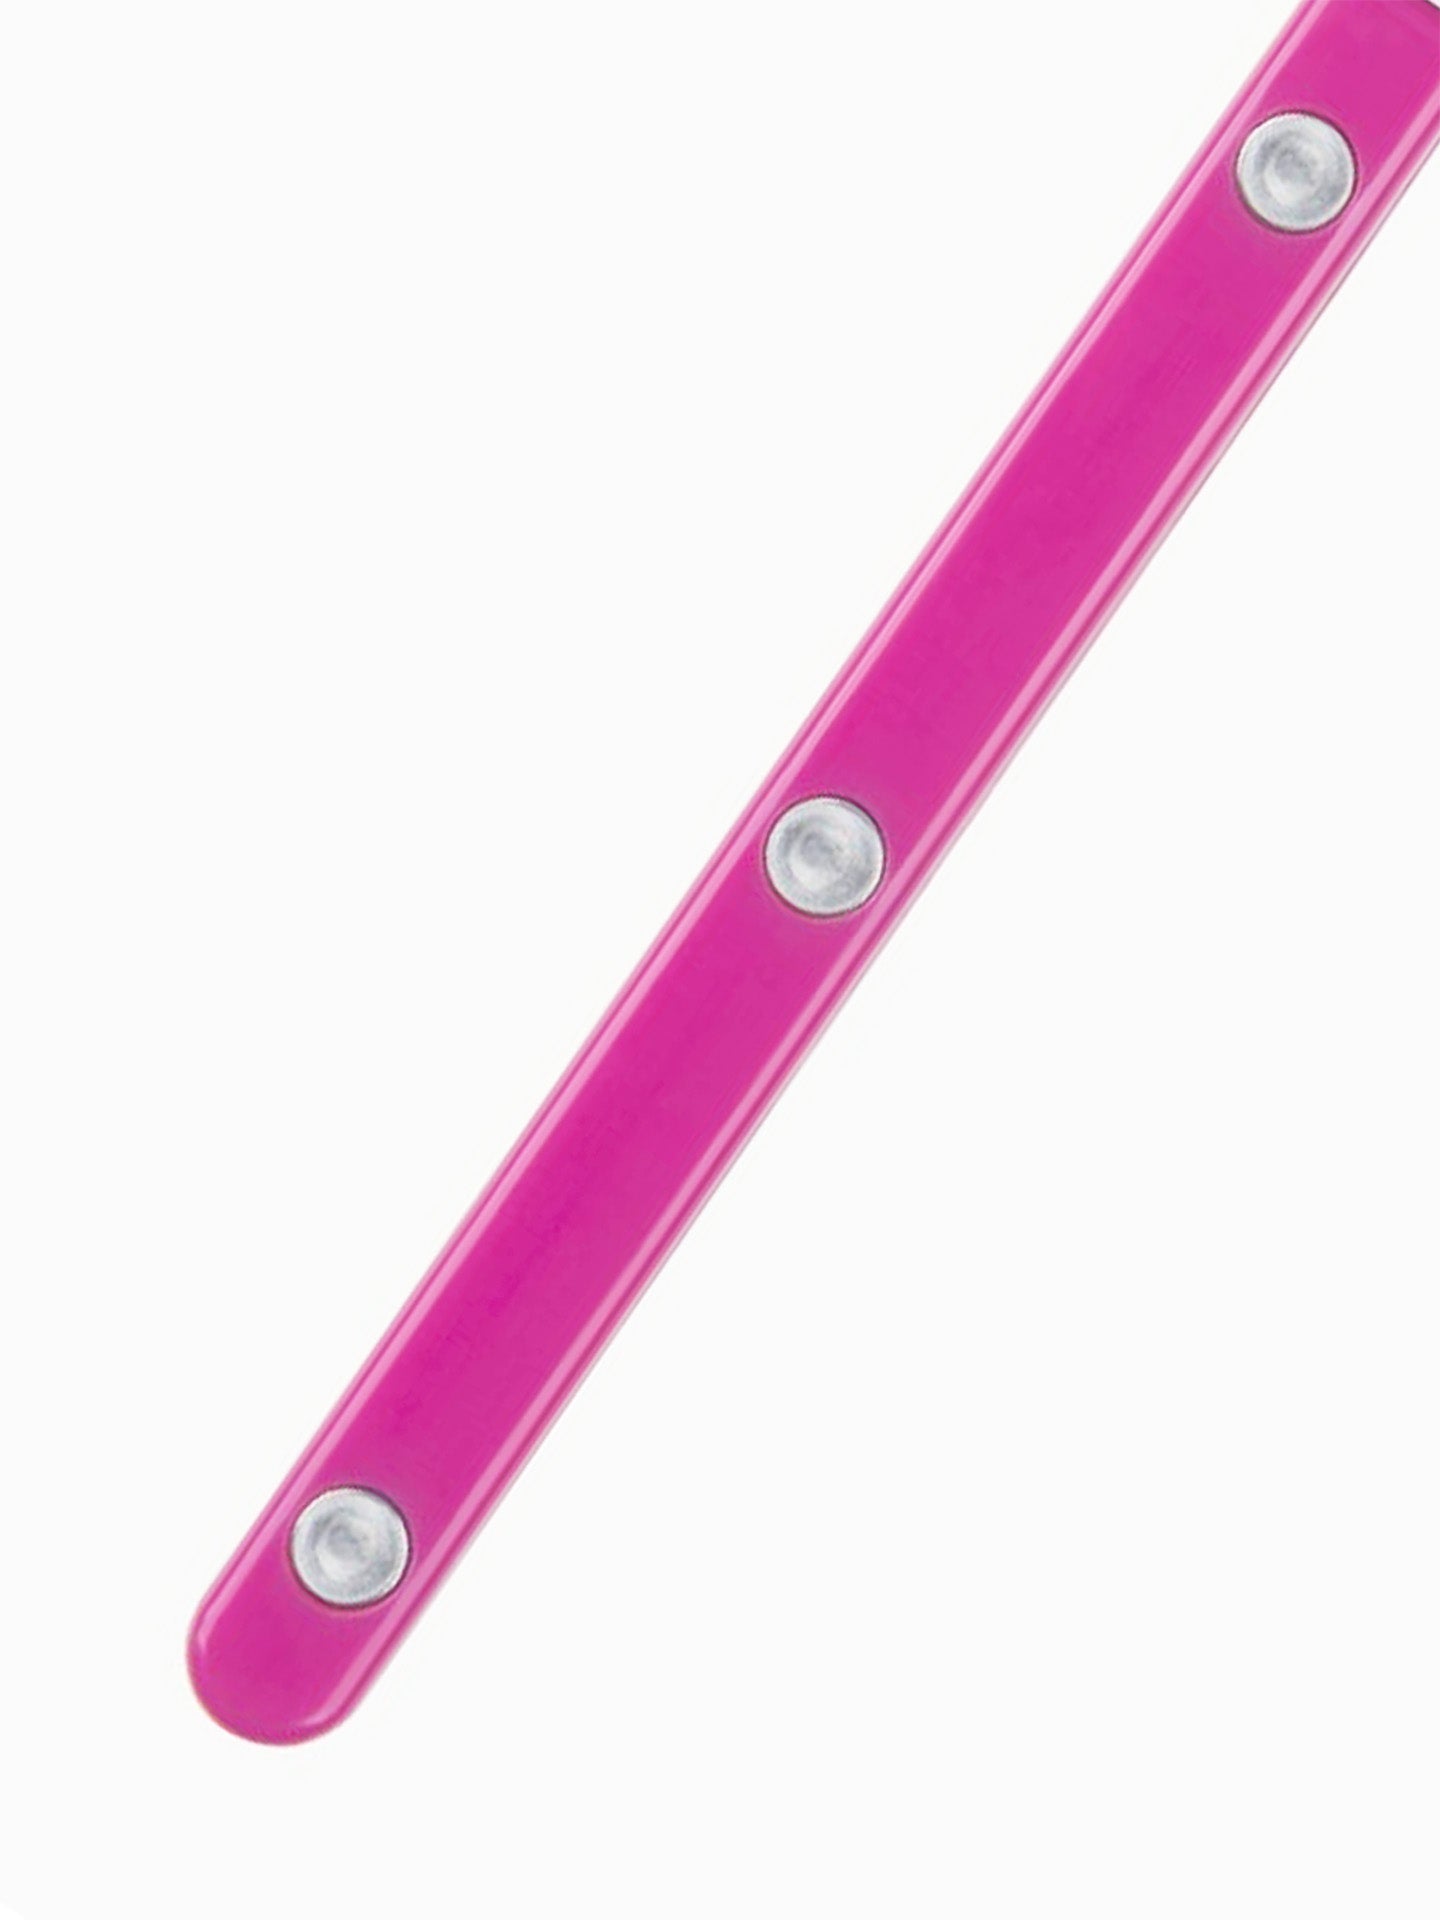 The acrylic handle is decorated with stainless steel rivets. The raspberry pink Bistro tea spoon is easy to clean in a dishwasher.